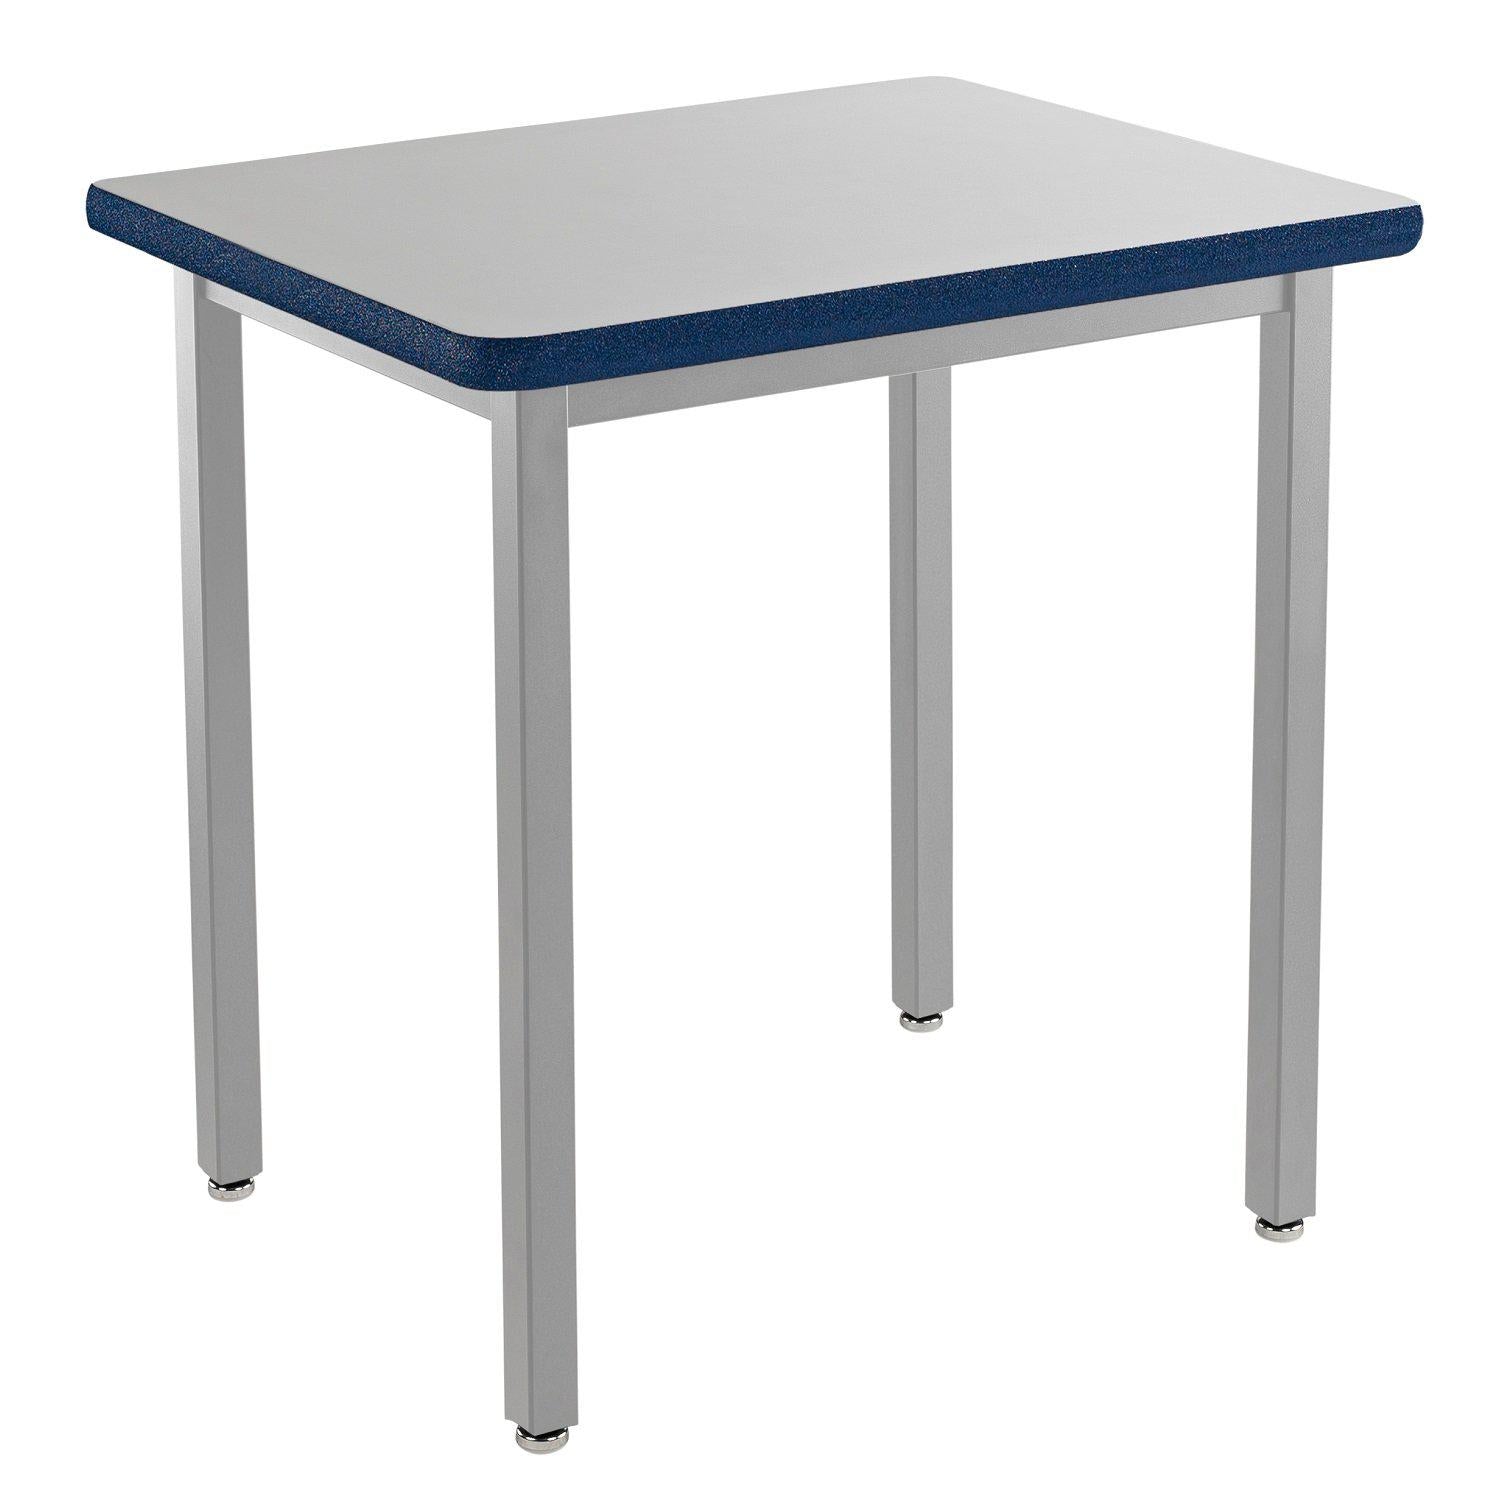 Heavy-Duty Fixed Height Utility Table, Soft Grey Frame, 24" x 24", Supreme High-Pressure Laminate Top with Black ProtectEdge